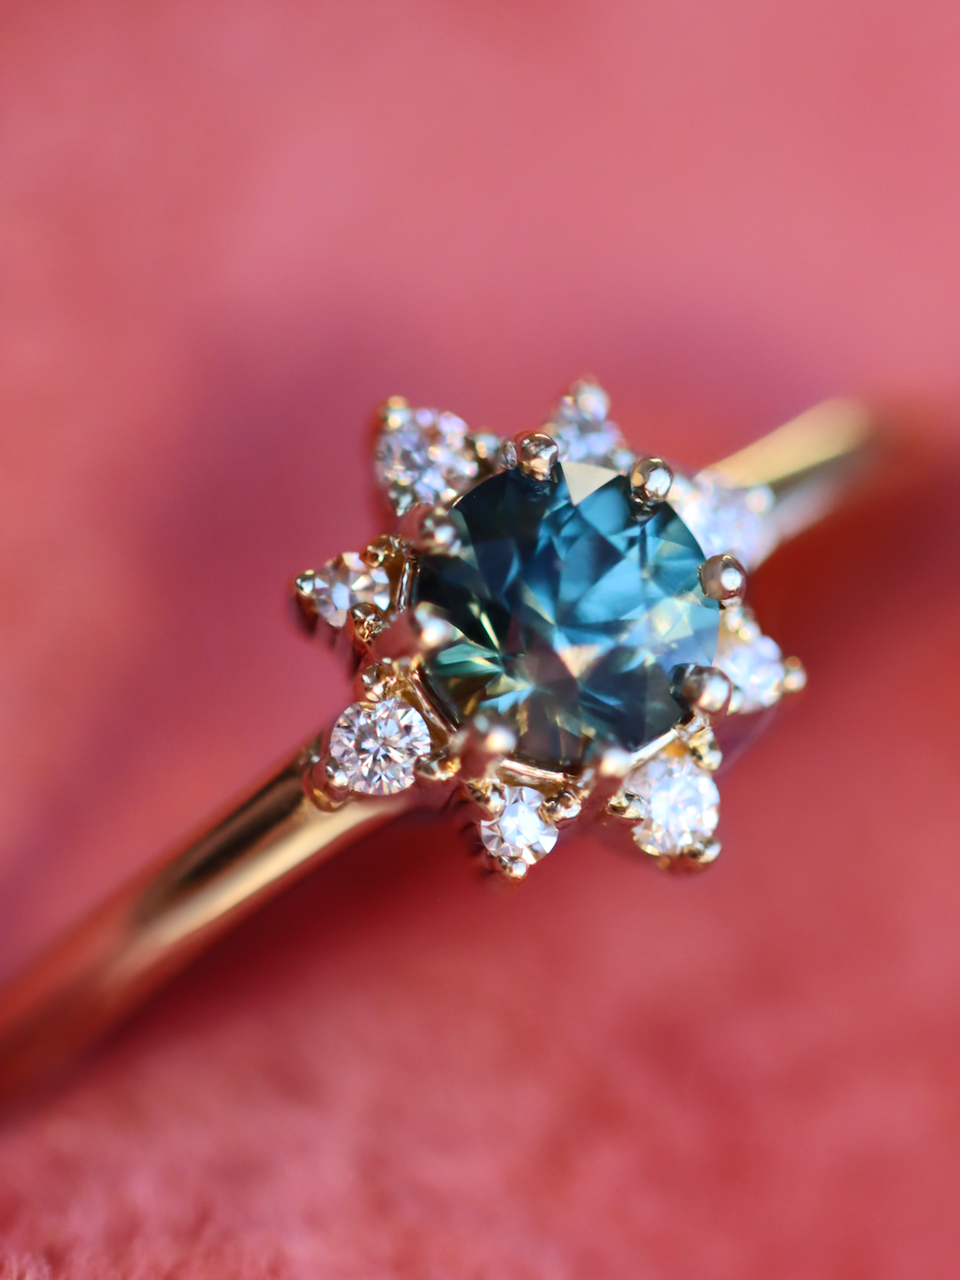 The Symbolism of a Sapphire